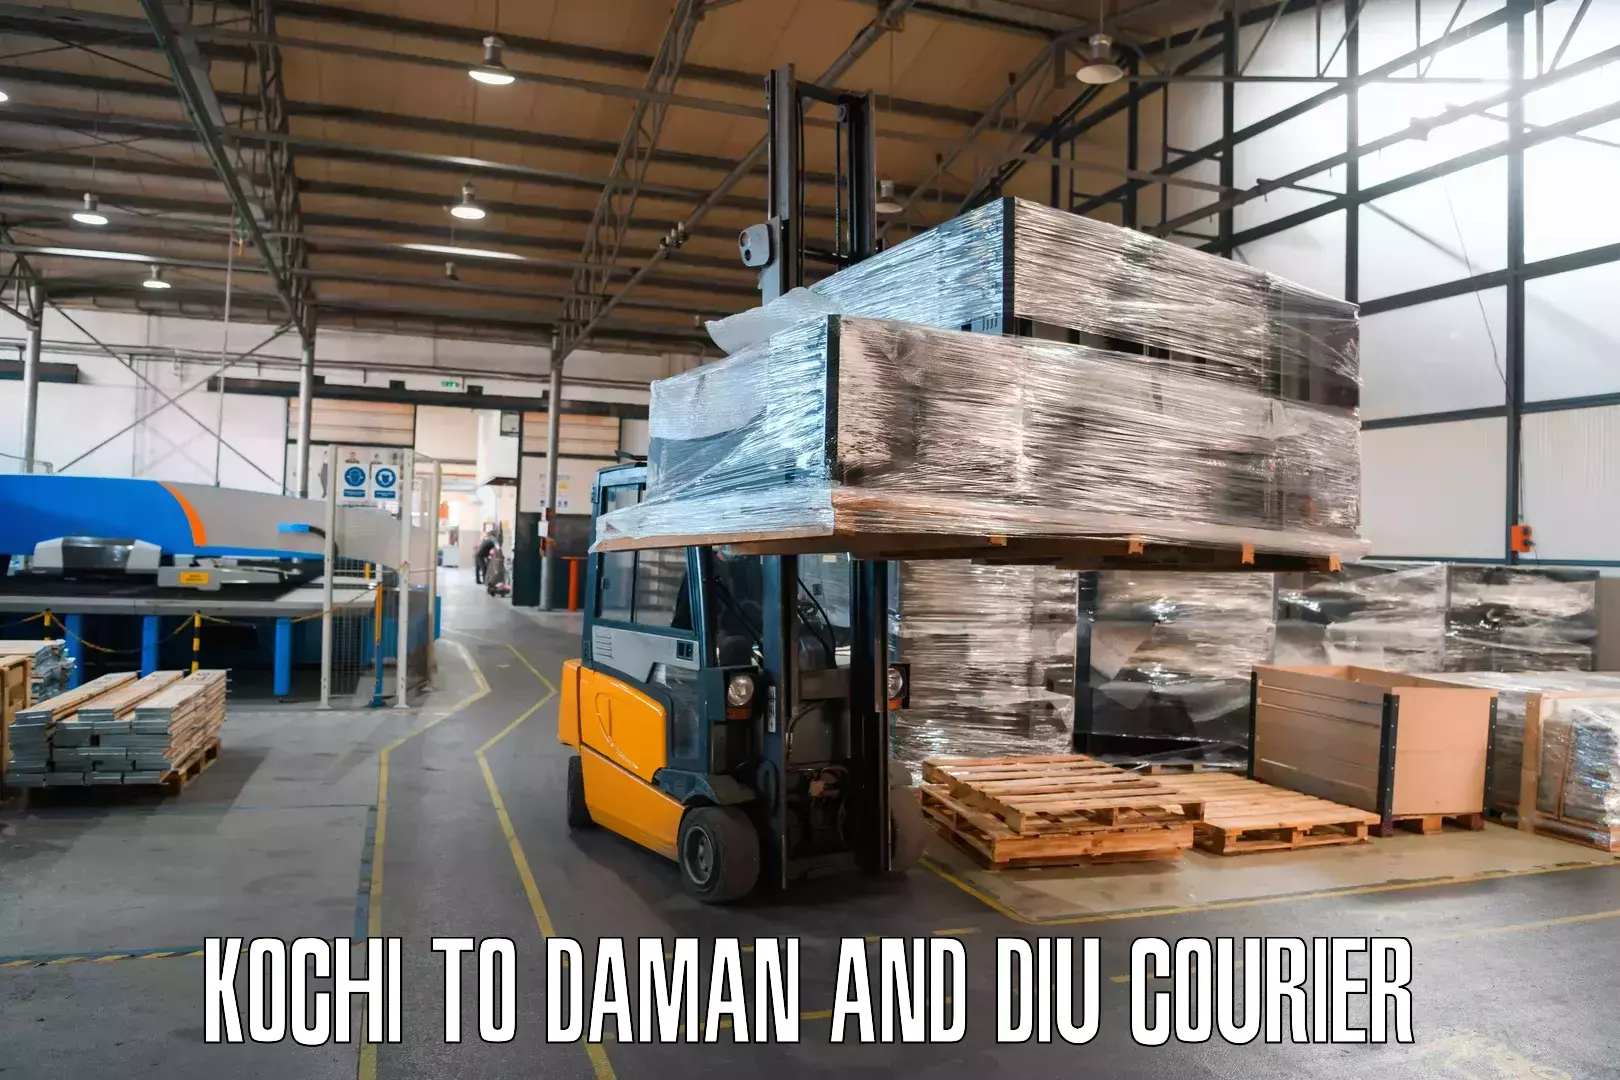 Express package delivery Kochi to Daman